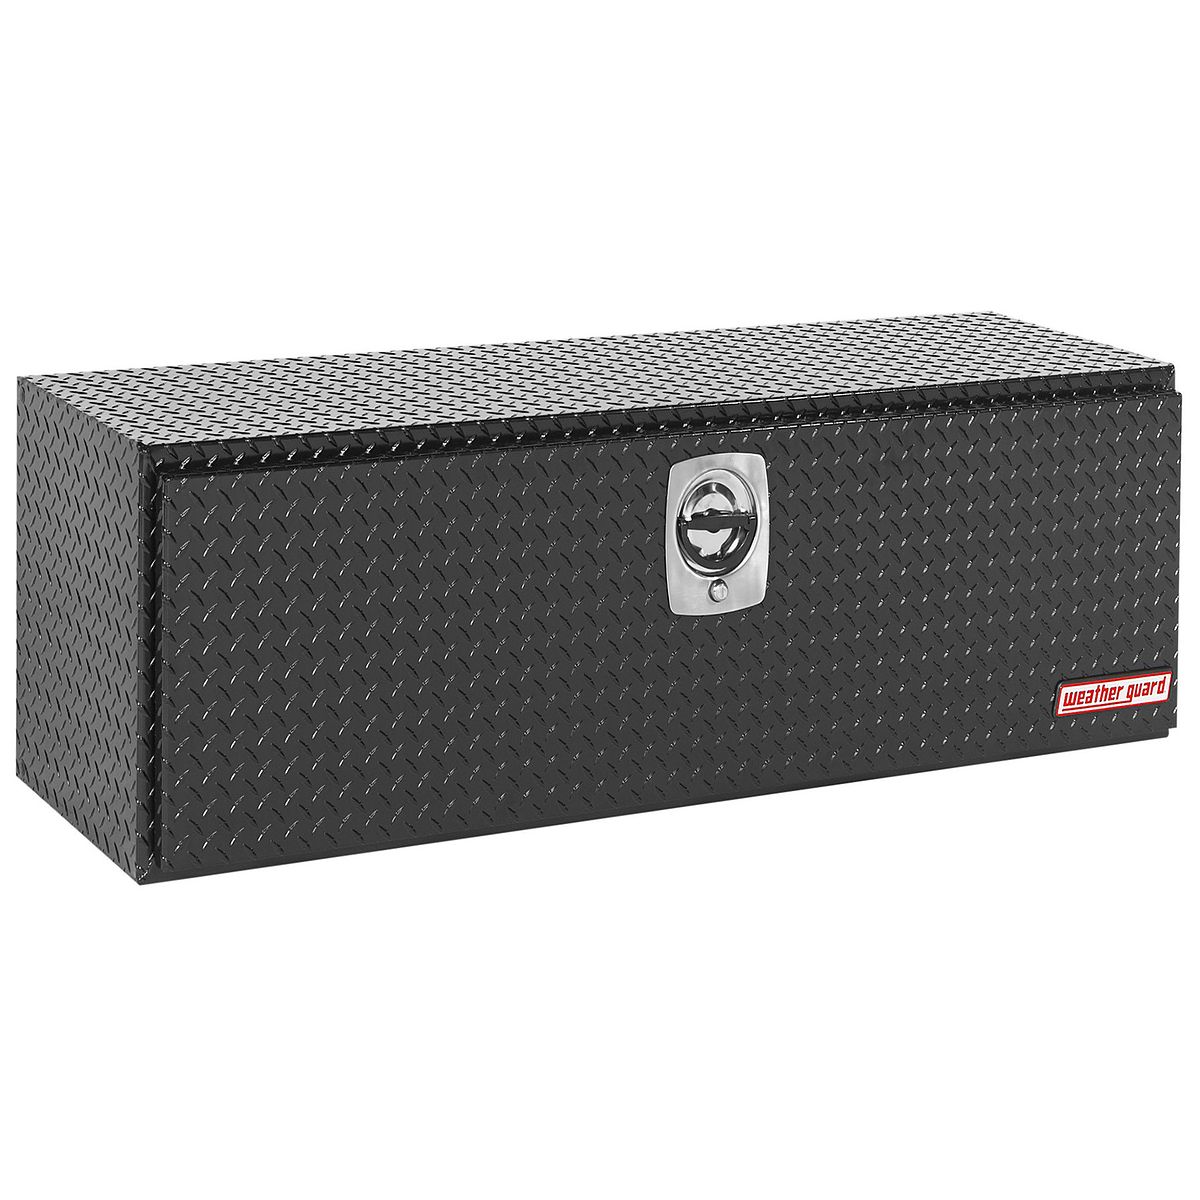 648-5-02 | Truck Boxes | WEATHER GUARD